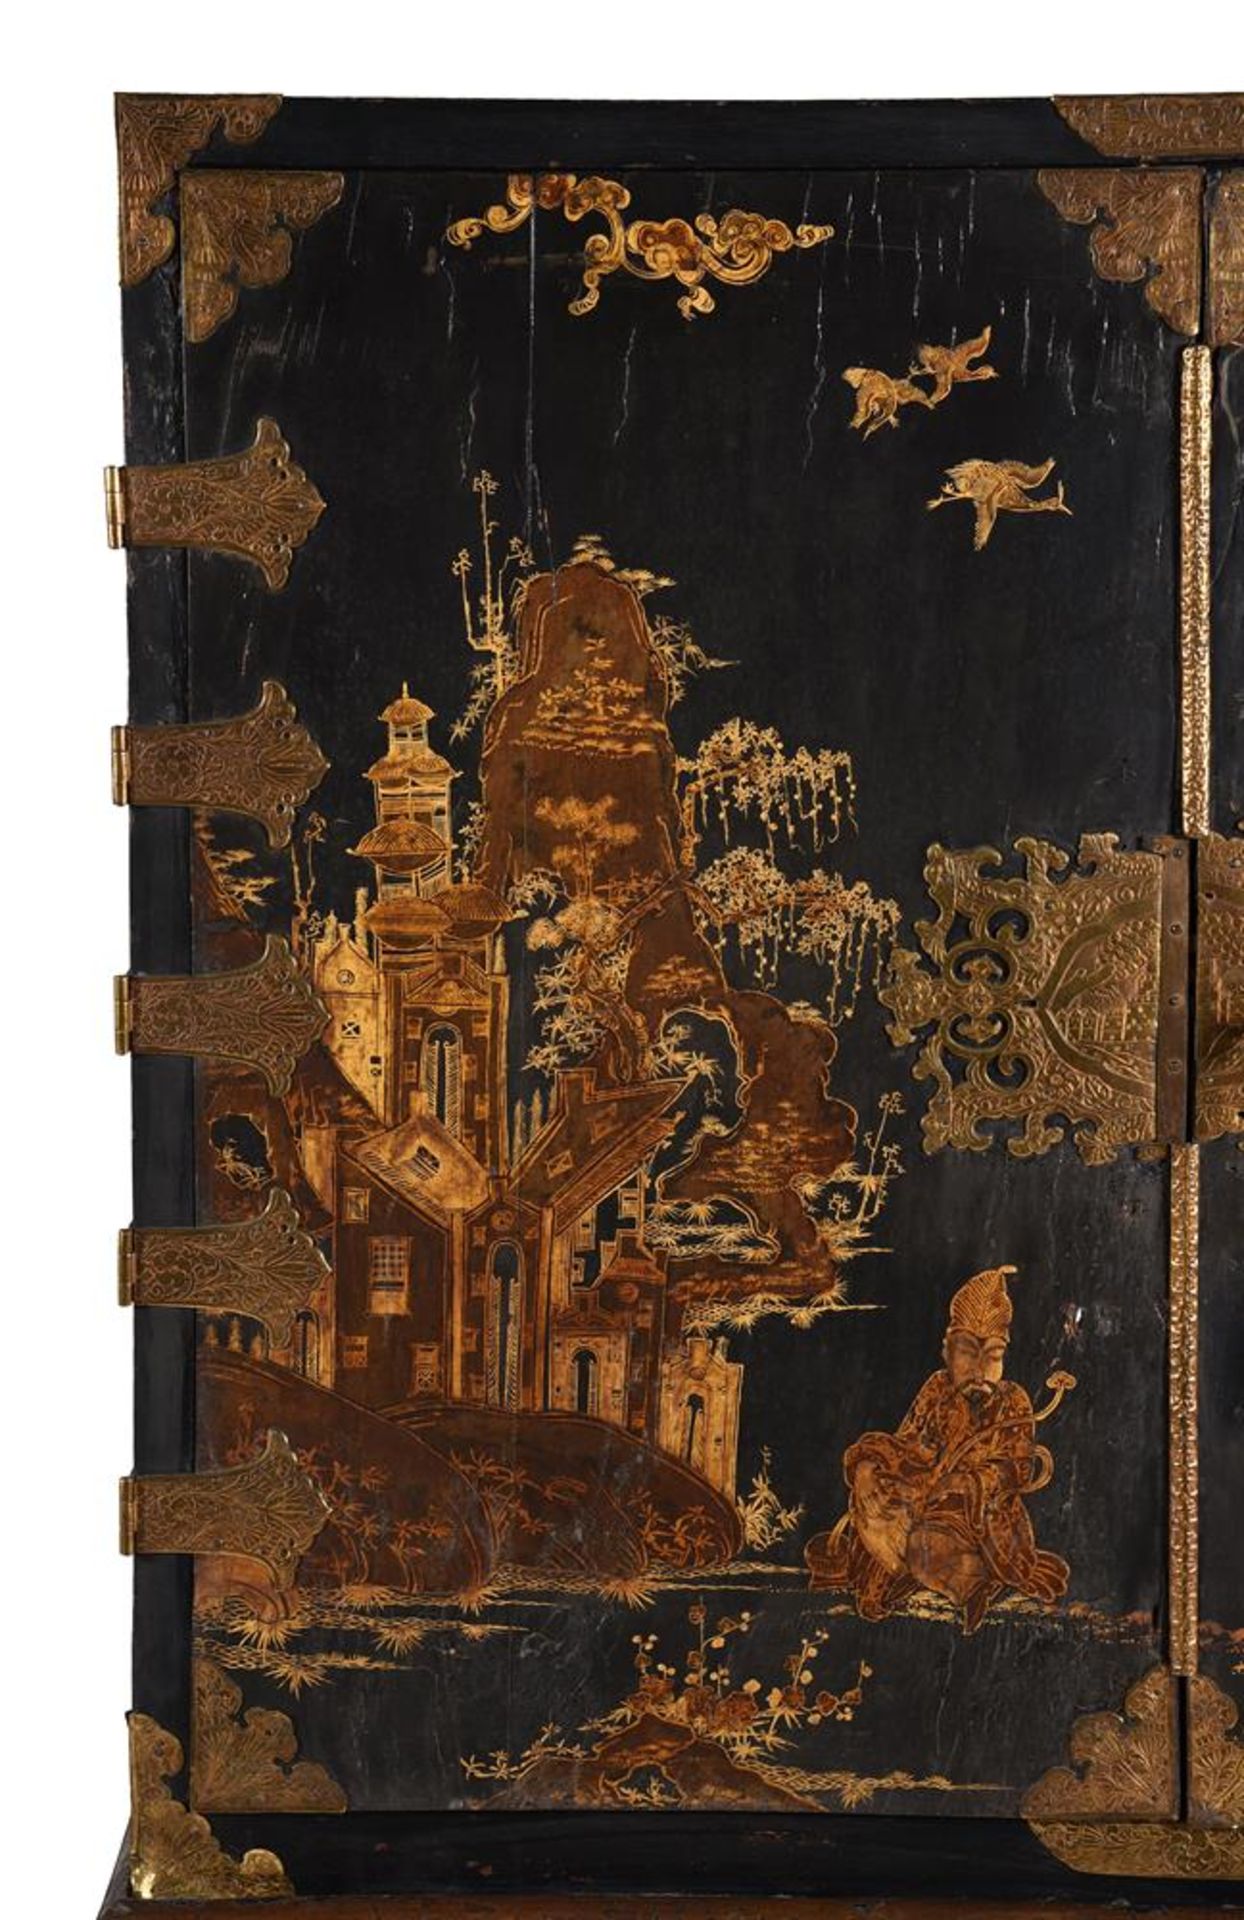 A WILLIAM & MARY BLACK LACQUER AND GILT JAPANNED CABINET ON STAND, THE CABINET LATE 17TH CENTURY - Image 7 of 17